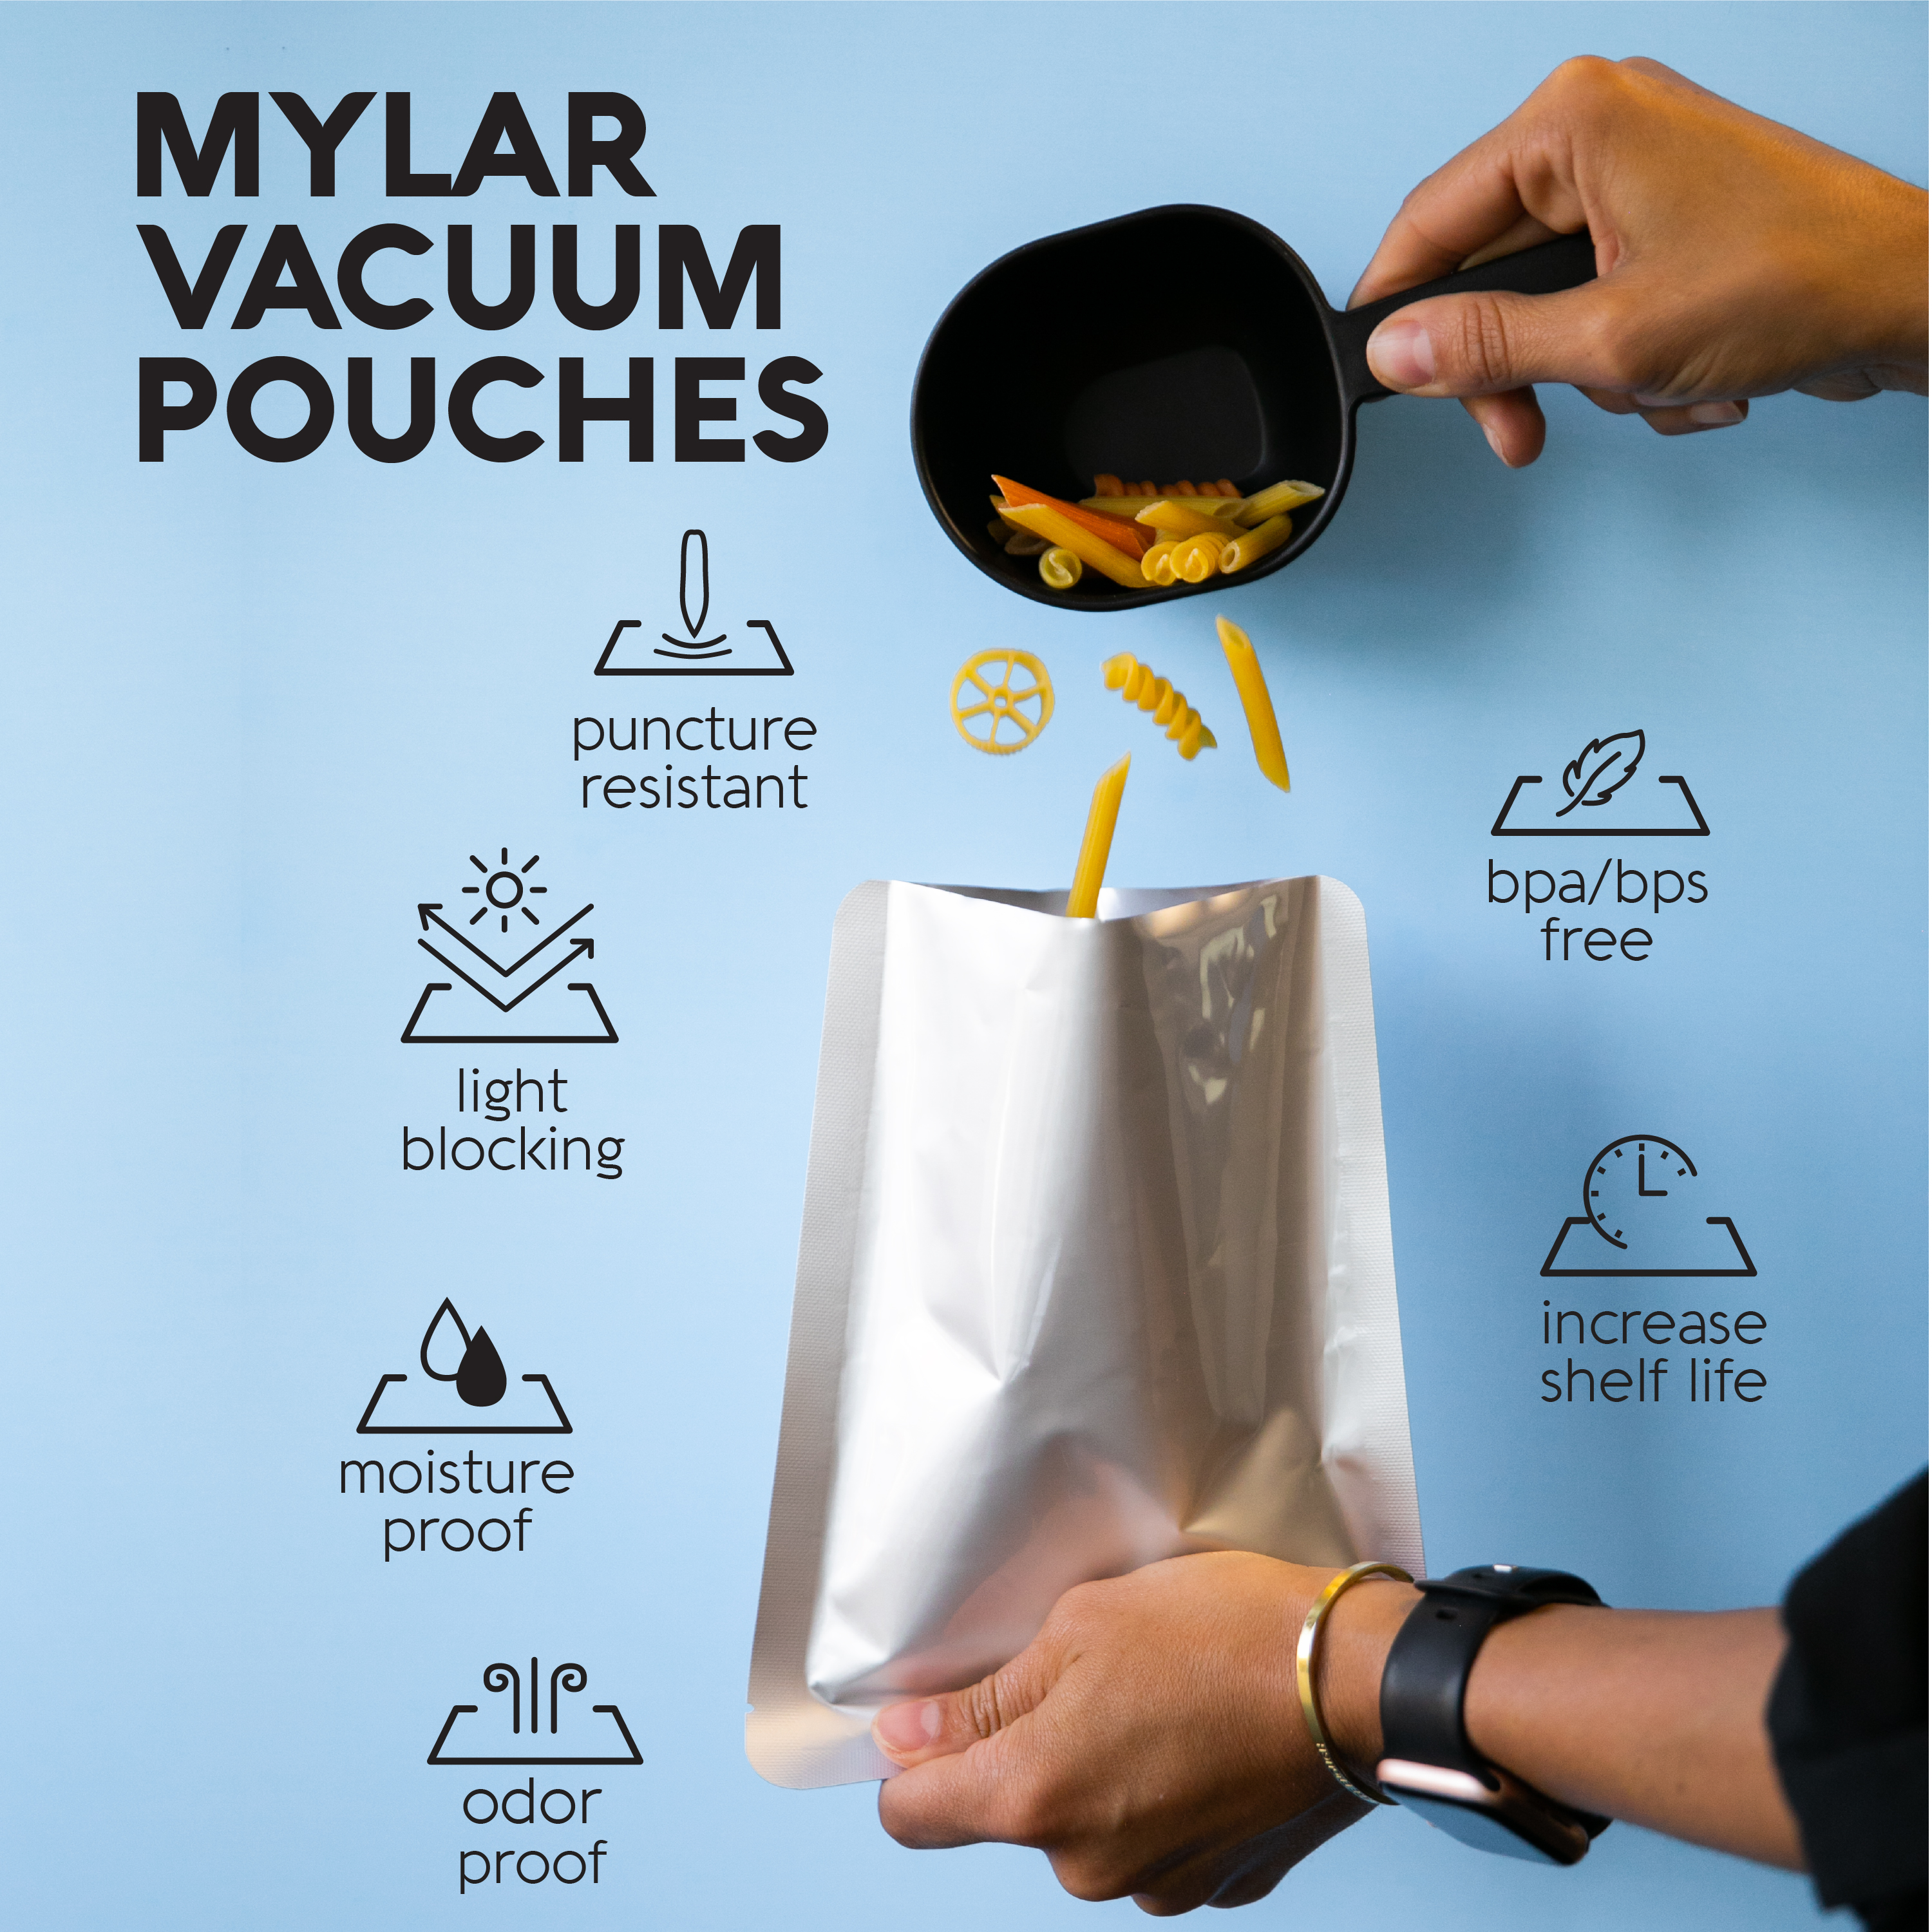 Discover the NextLevel Solution for LongLasting Food Storage Avid  Armors NEW Mylar Chamber Vacuum Pouches  Avid Armor